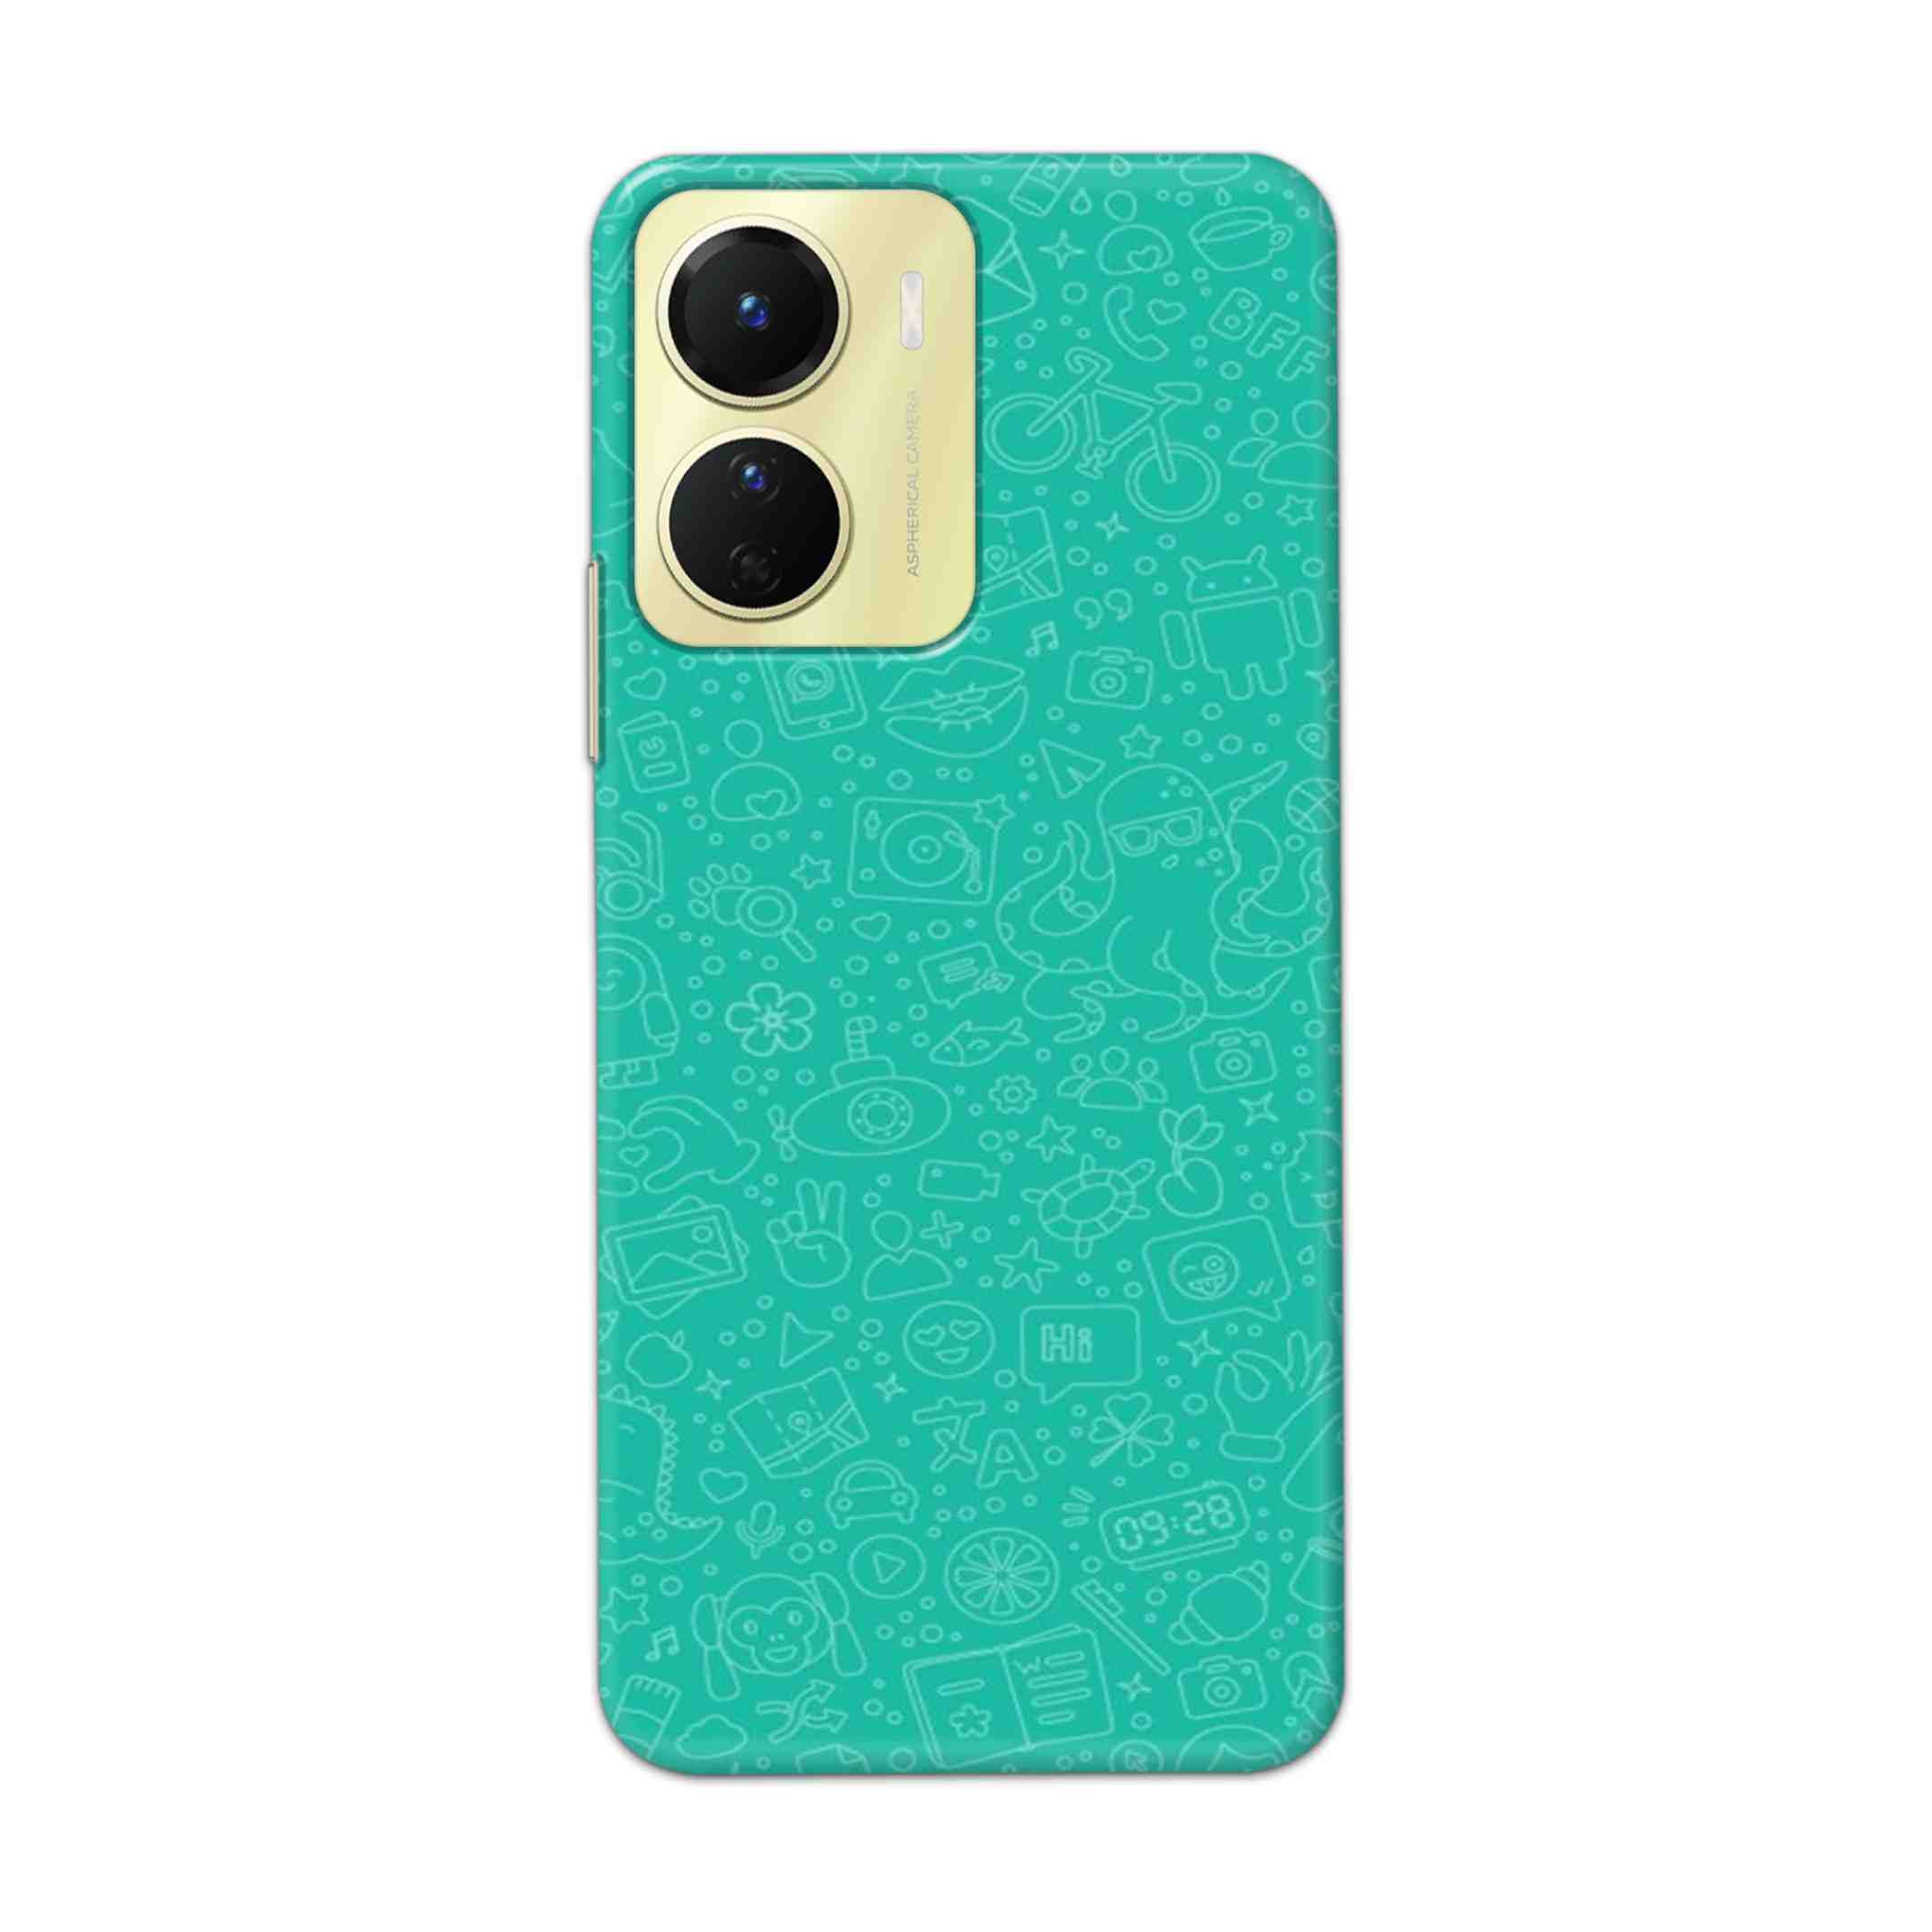 Buy Whatsapp Hard Back Mobile Phone Case Cover For Vivo Y16 Online